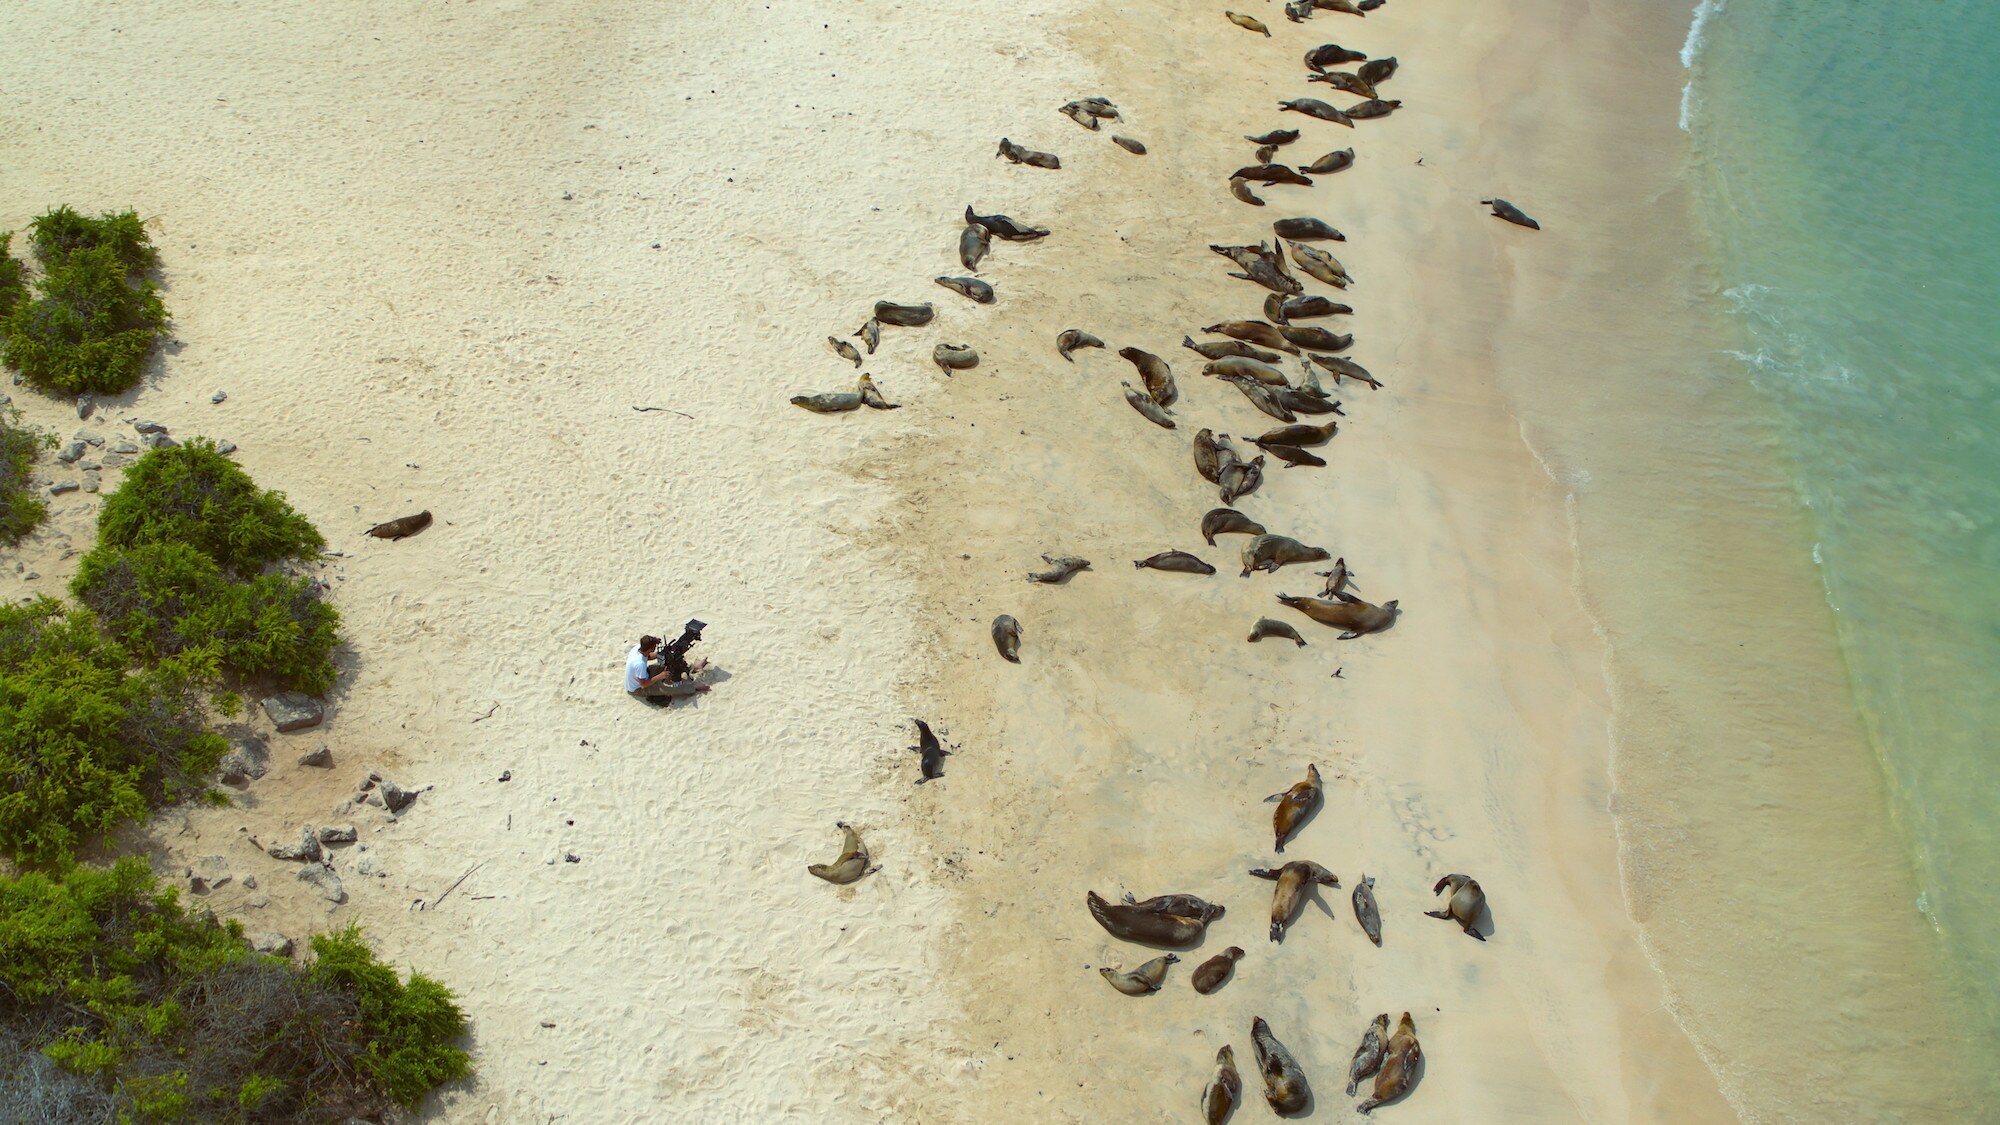 Bertie Gregory sitting on the beach filming a group of basking sea lions. (National Geographic for Disney+/Jeff Hester)